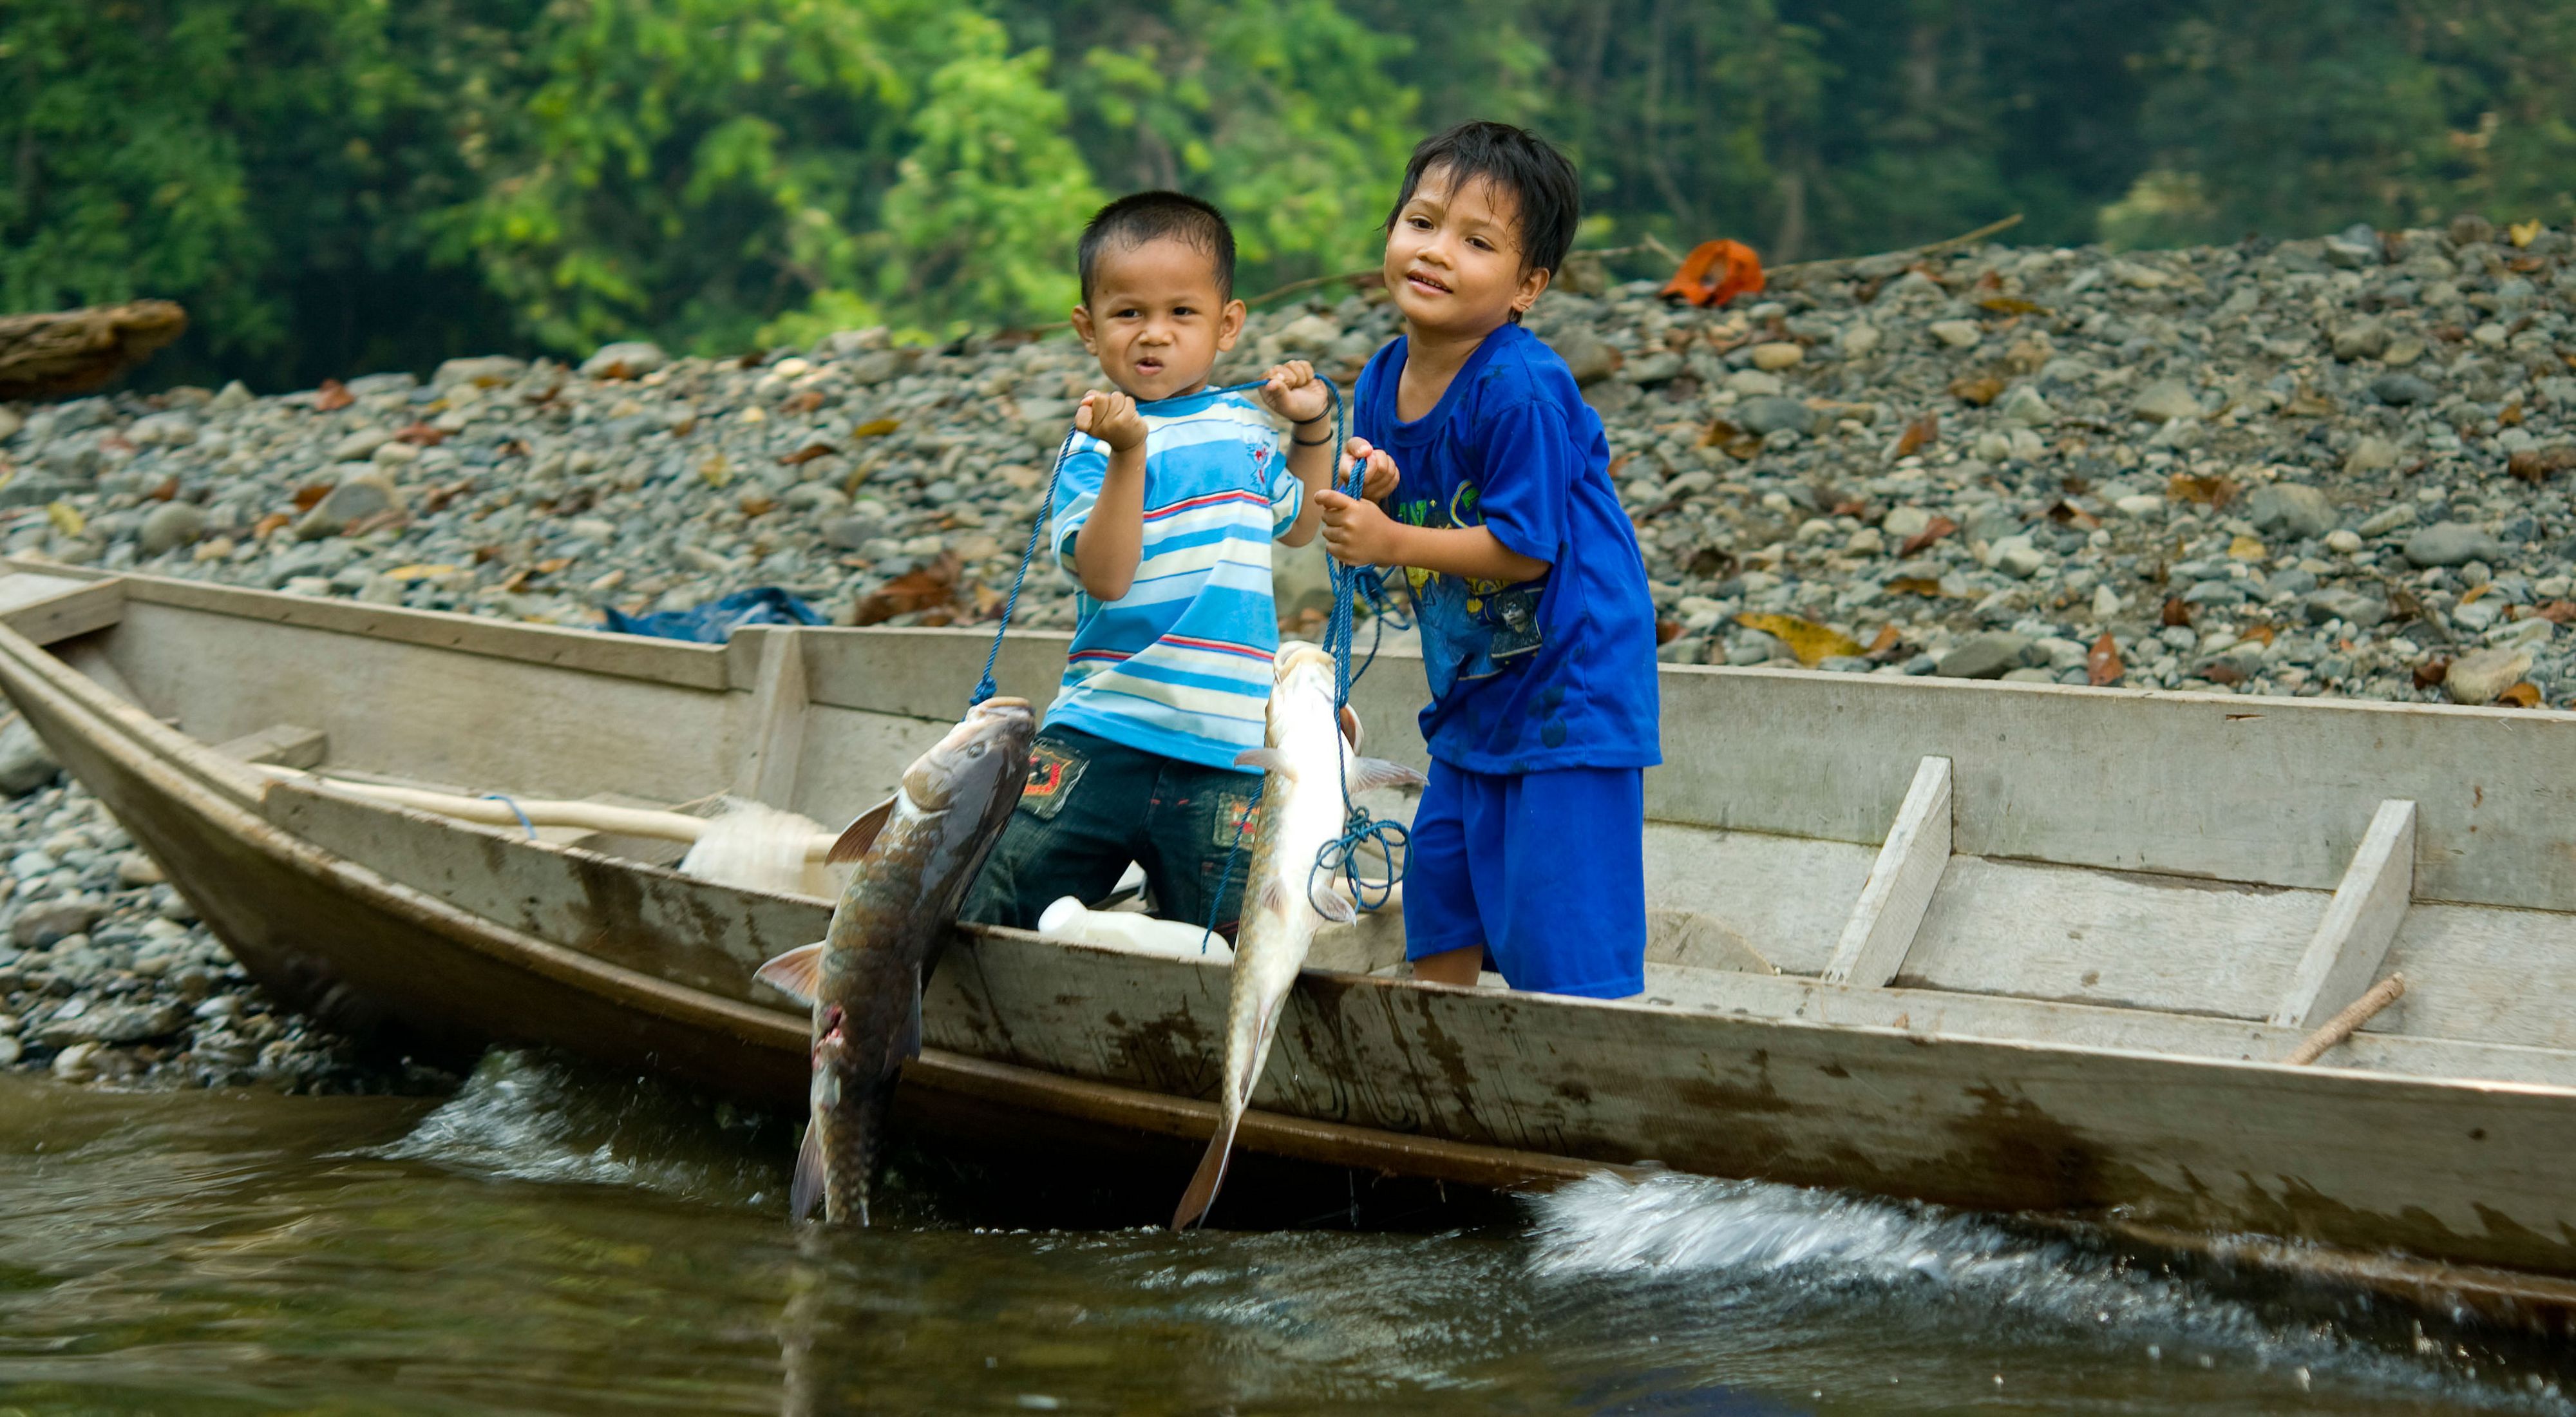 Village children display freshly caught fish at the Long Laay village on the banks of the Sagah River in the Bornean forest of the Berau district, East Kalimantan, Borneo, Indonesia. The Nature Conservancy is working with partners and villagers in the Bornean forests of the Berau district for reduced-impact logging. Surprisingly simple changes to how a company logs a forest can yield more intact forests, cleaner water, healthier and happier local villagers, and, on a global scale, more trees sequestering carbon and fighting climate change.